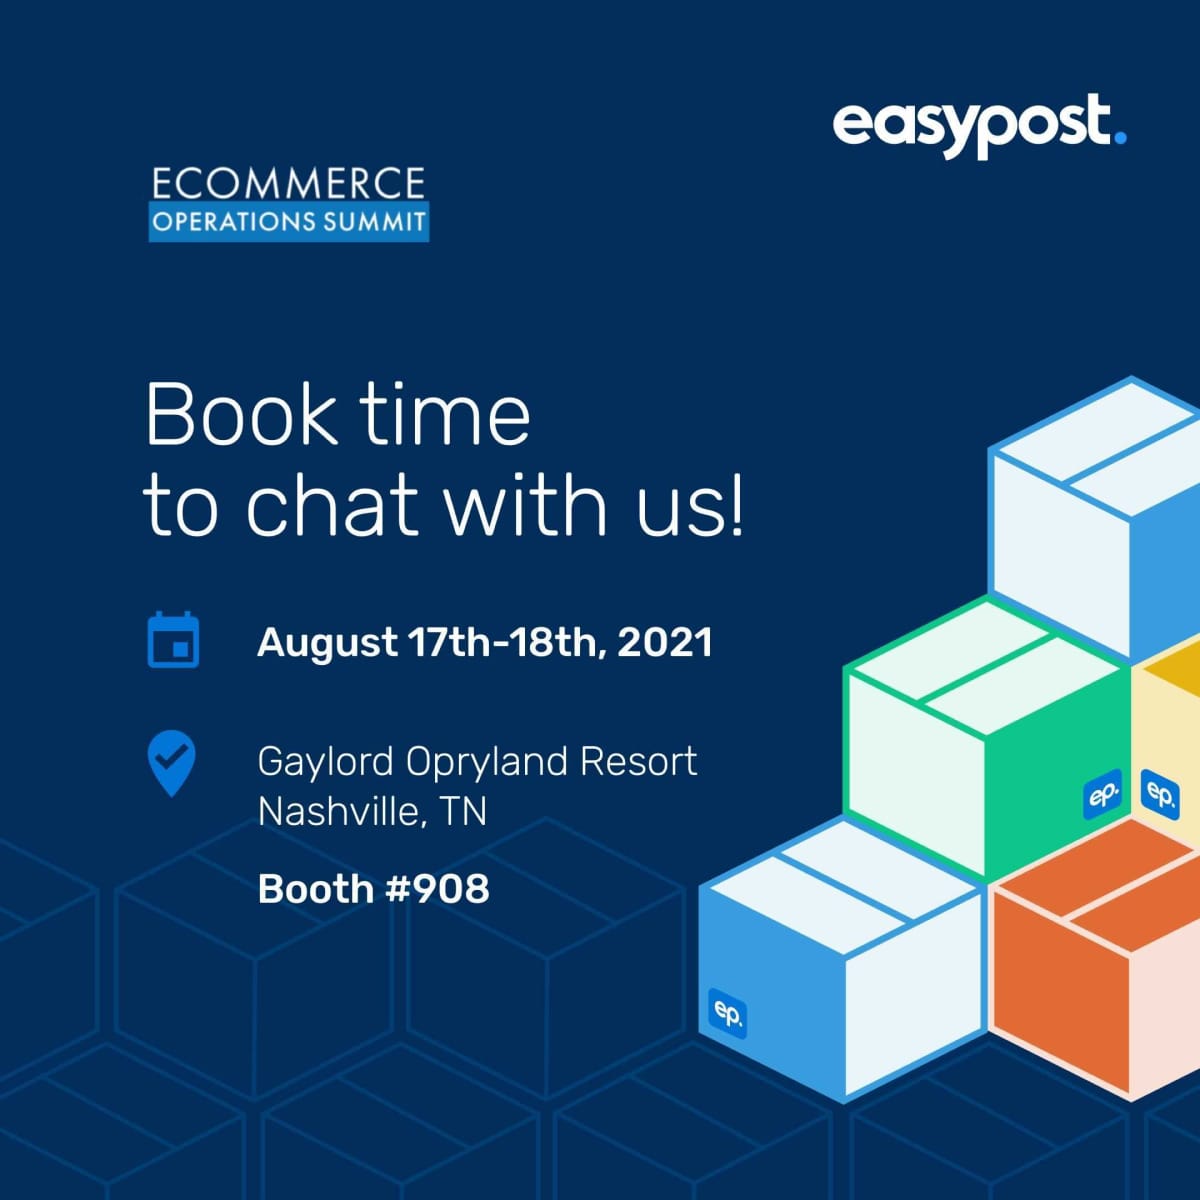 EasyPost is at the Operations Summit Trade Show EasyPost